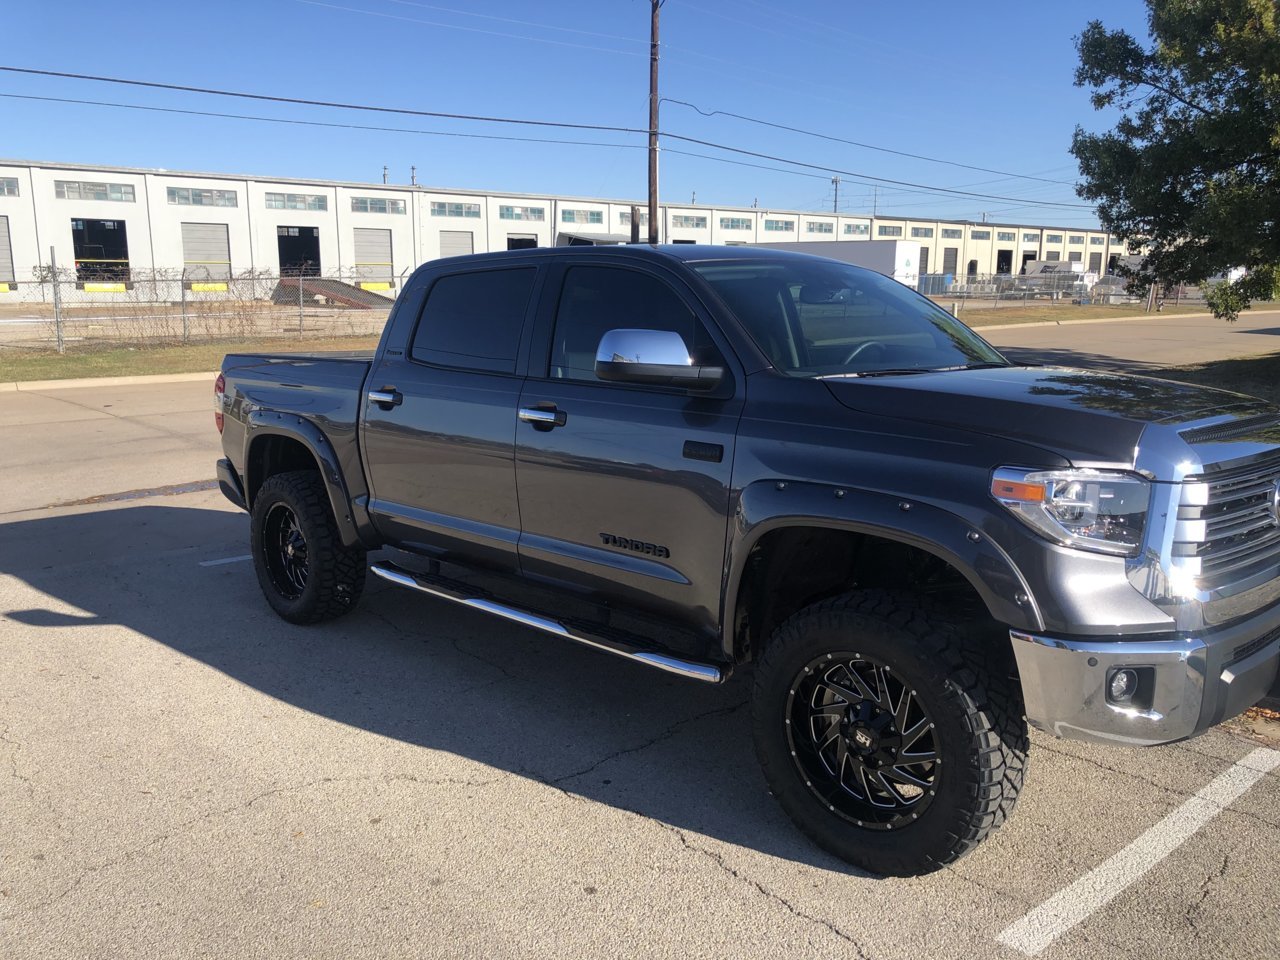 New wheels Tires and Lift Installed | Toyota Tundra Forum